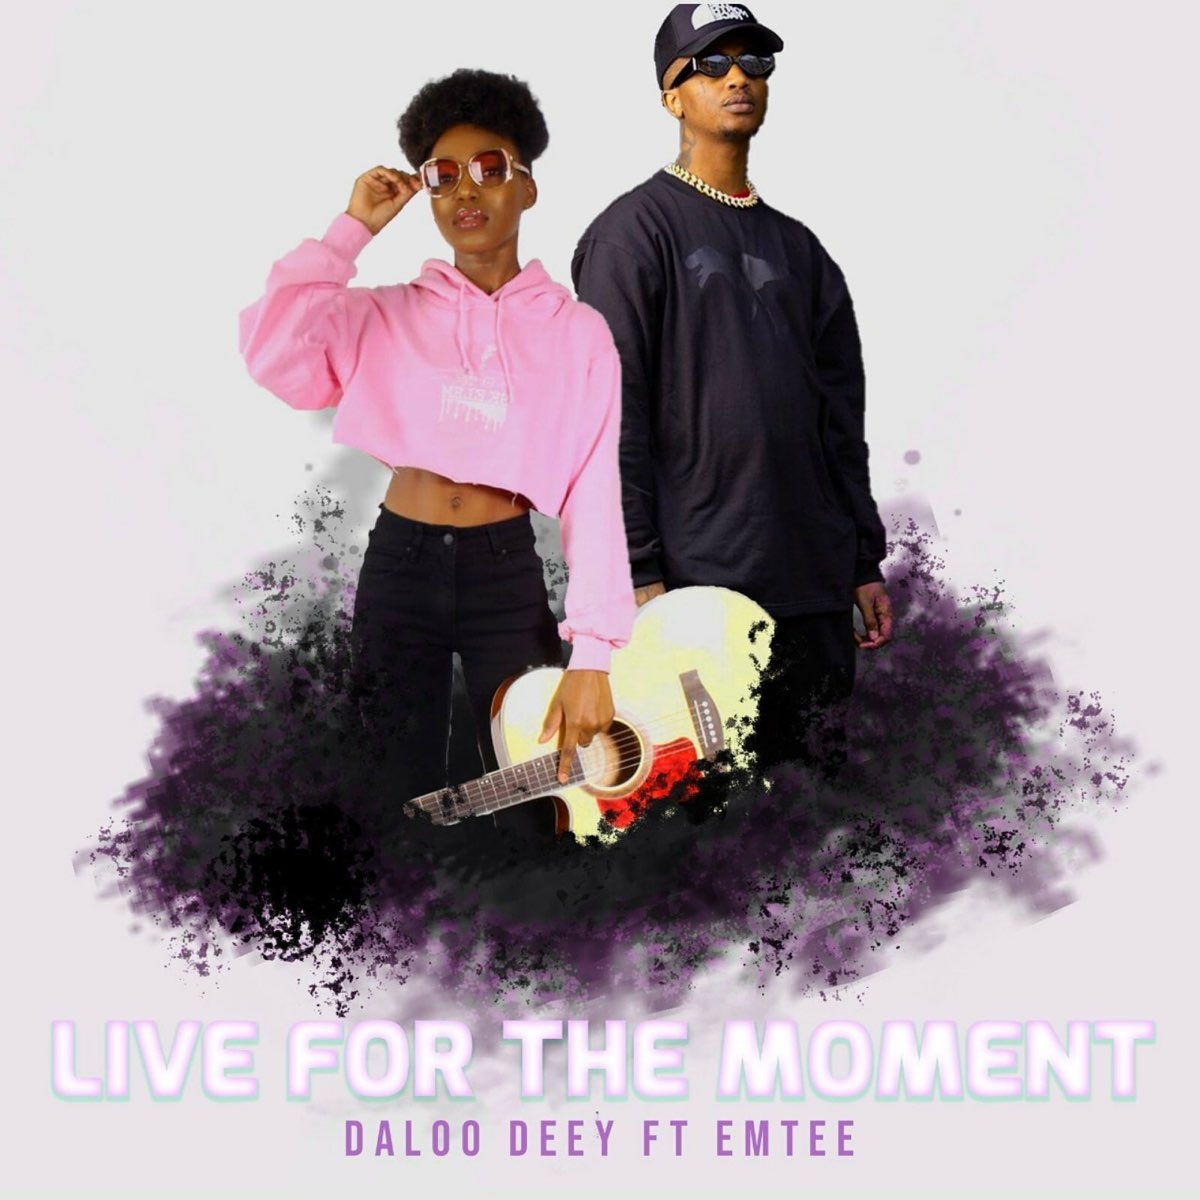 VIDEO: Daloo Deey – Live For The Moment Ft. Emtee